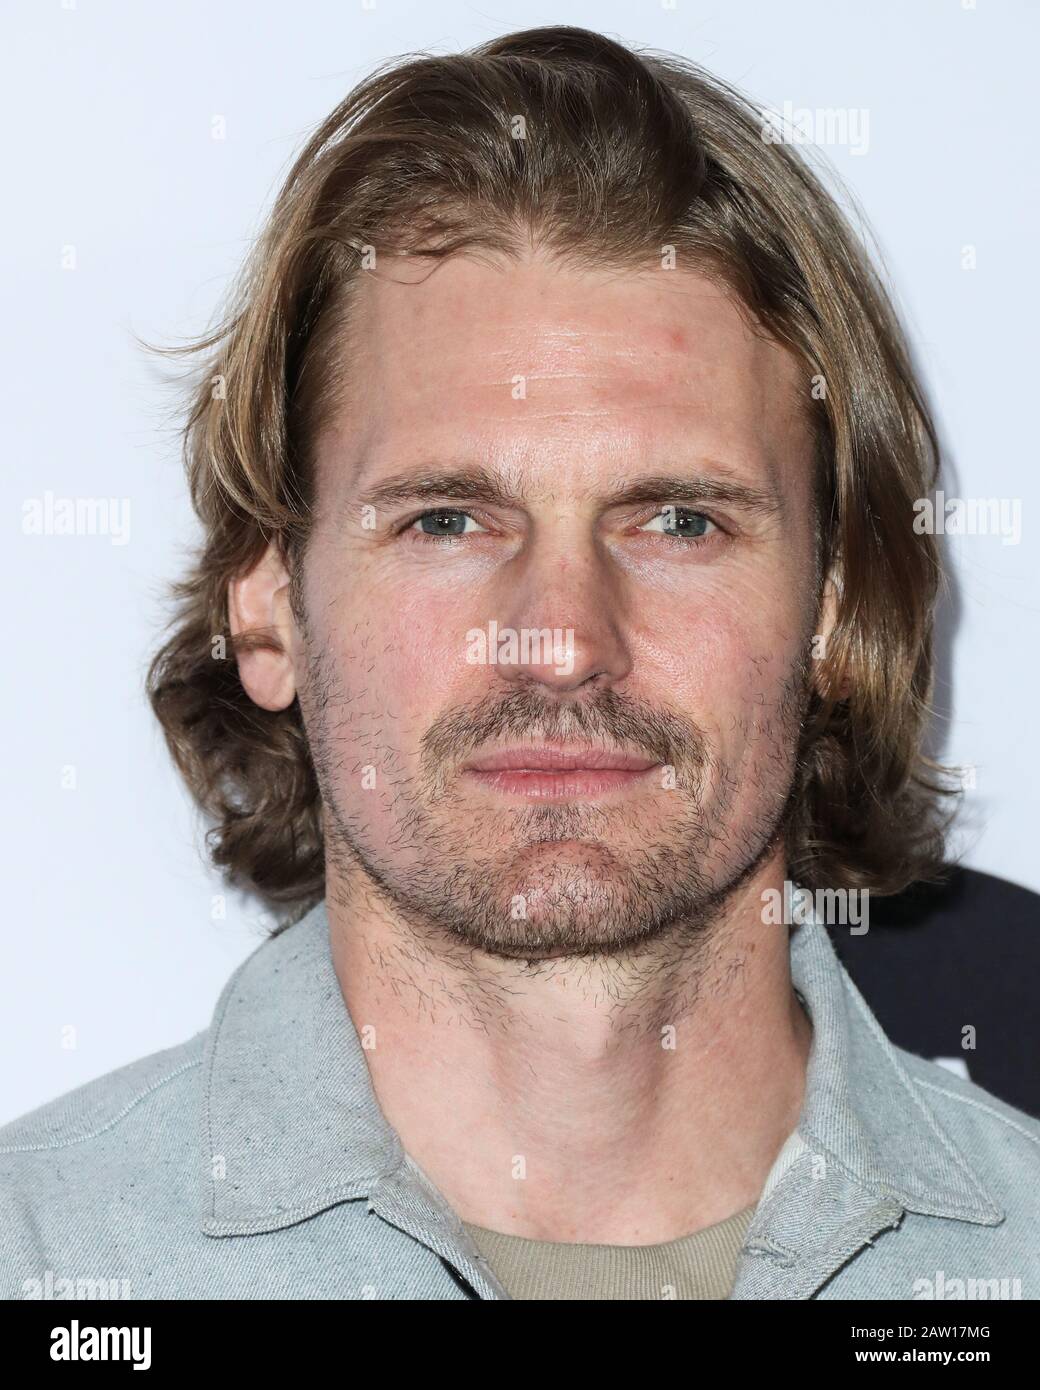 Los Angeles, United States. 05th Feb, 2020. LOS ANGELES, CALIFORNIA, USA - FEBRUARY 05: Josh Pence arrives at the Los Angeles Art Show 2020 Opening Night Gala held at the Los Angeles Convention Center on February 5, 2020 in Los Angeles, California, United States. (Photo by Xavier Collin/Image Press Agency) Credit: Image Press Agency/Alamy Live News Stock Photo